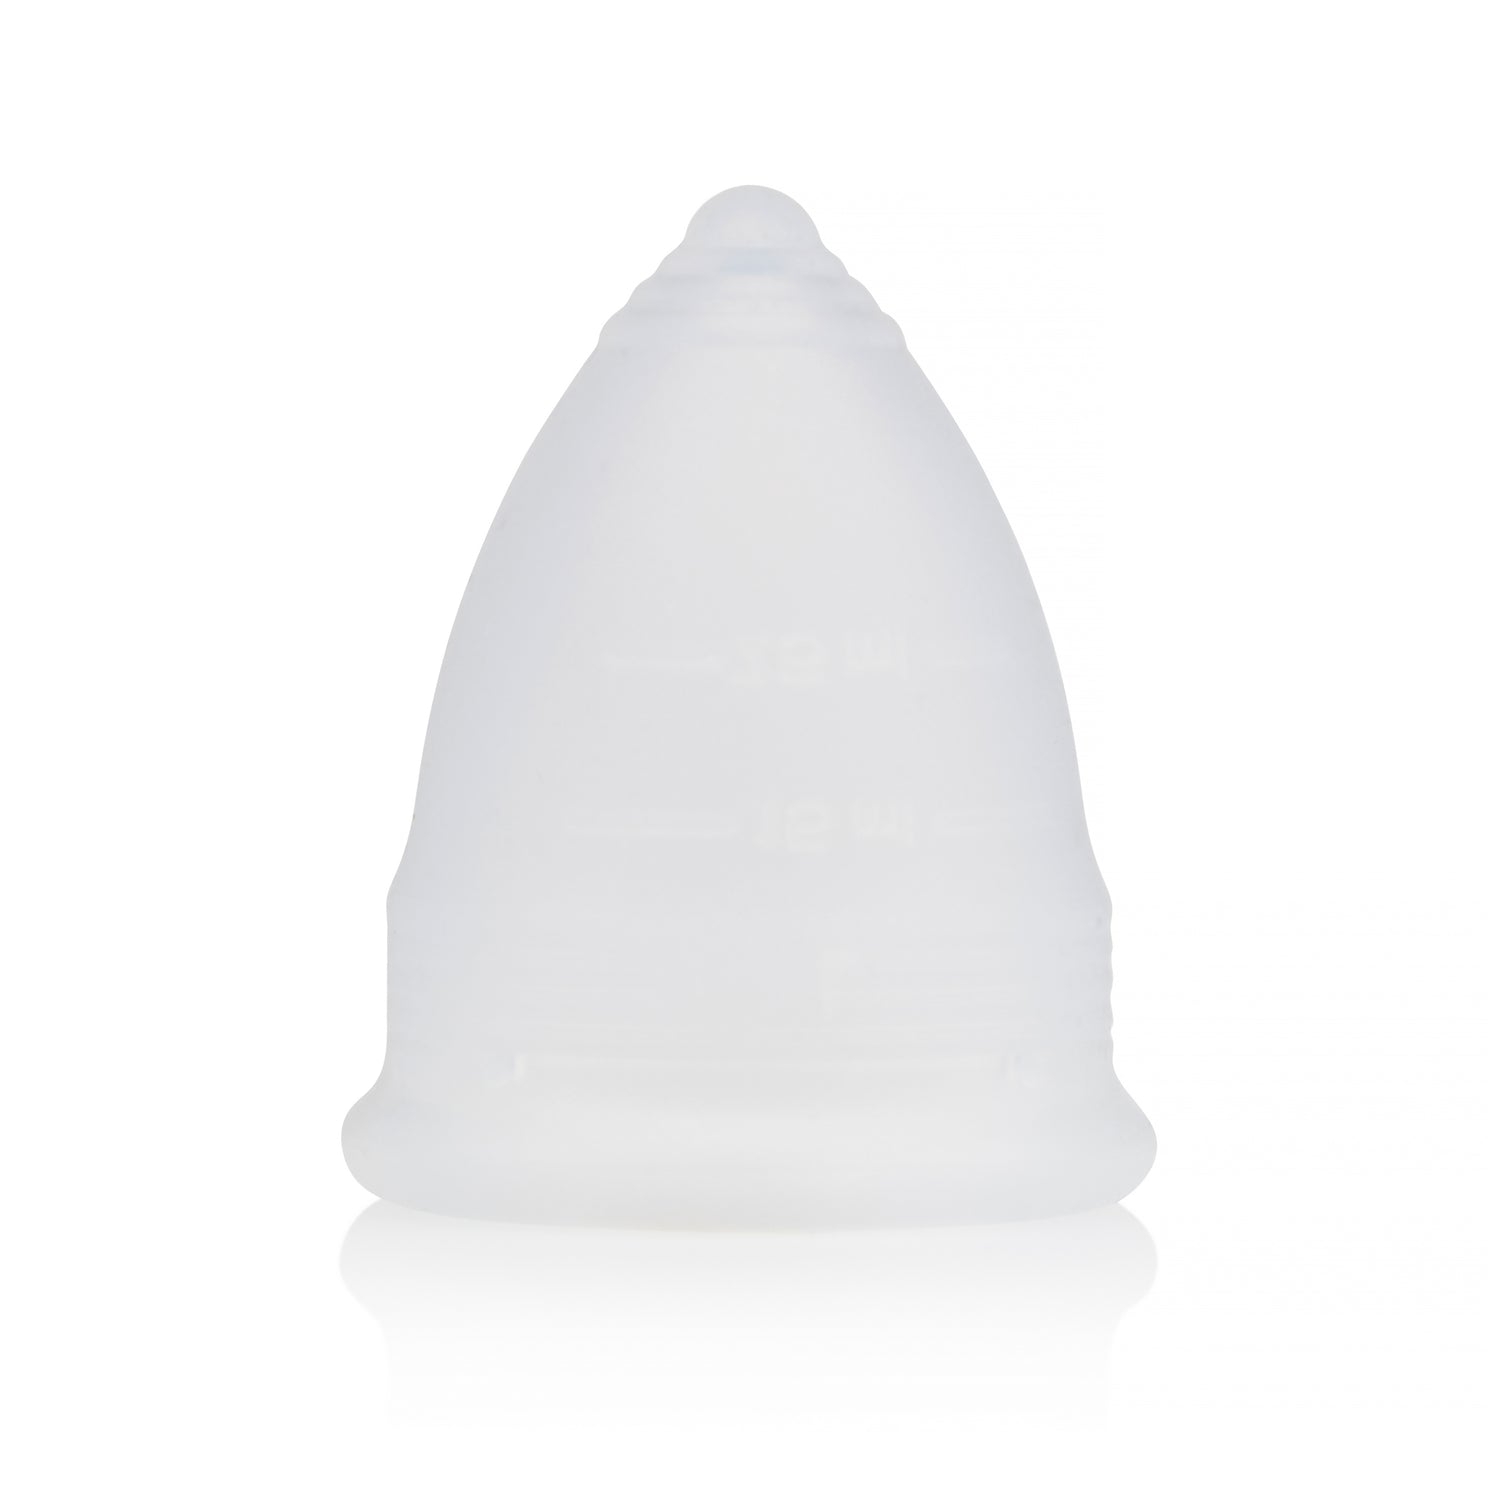 Funmicup No-stem Anatomic Menstrual Cup - Large product on white background